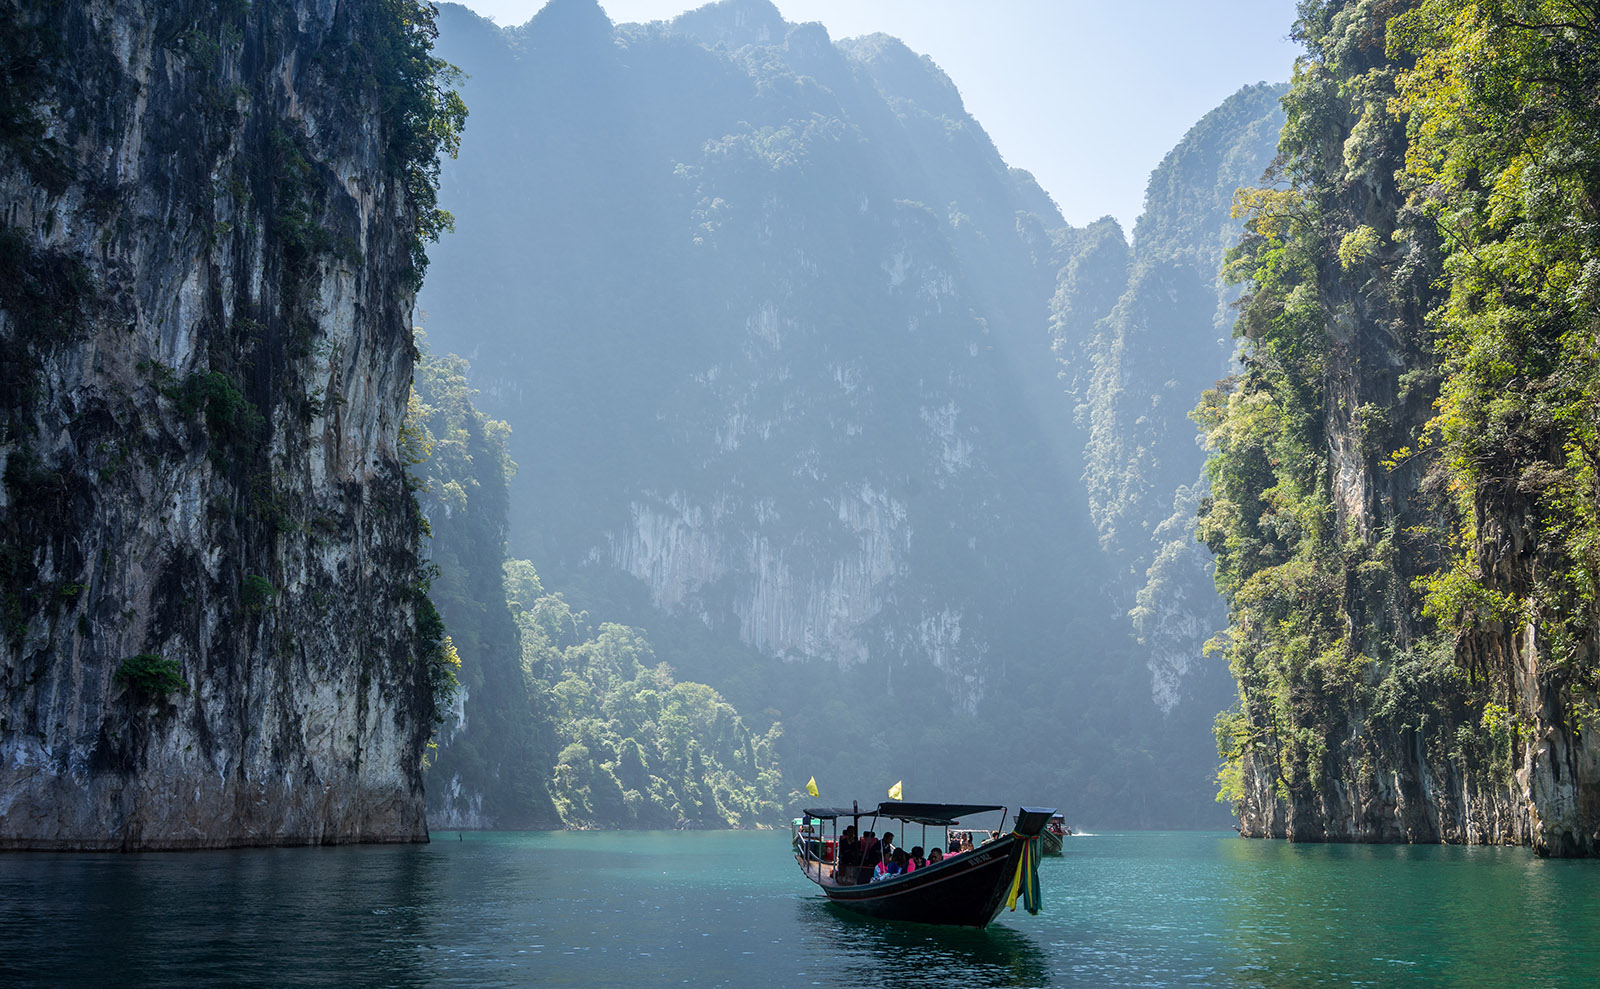 5 Great Books Set in Thailand That We Love